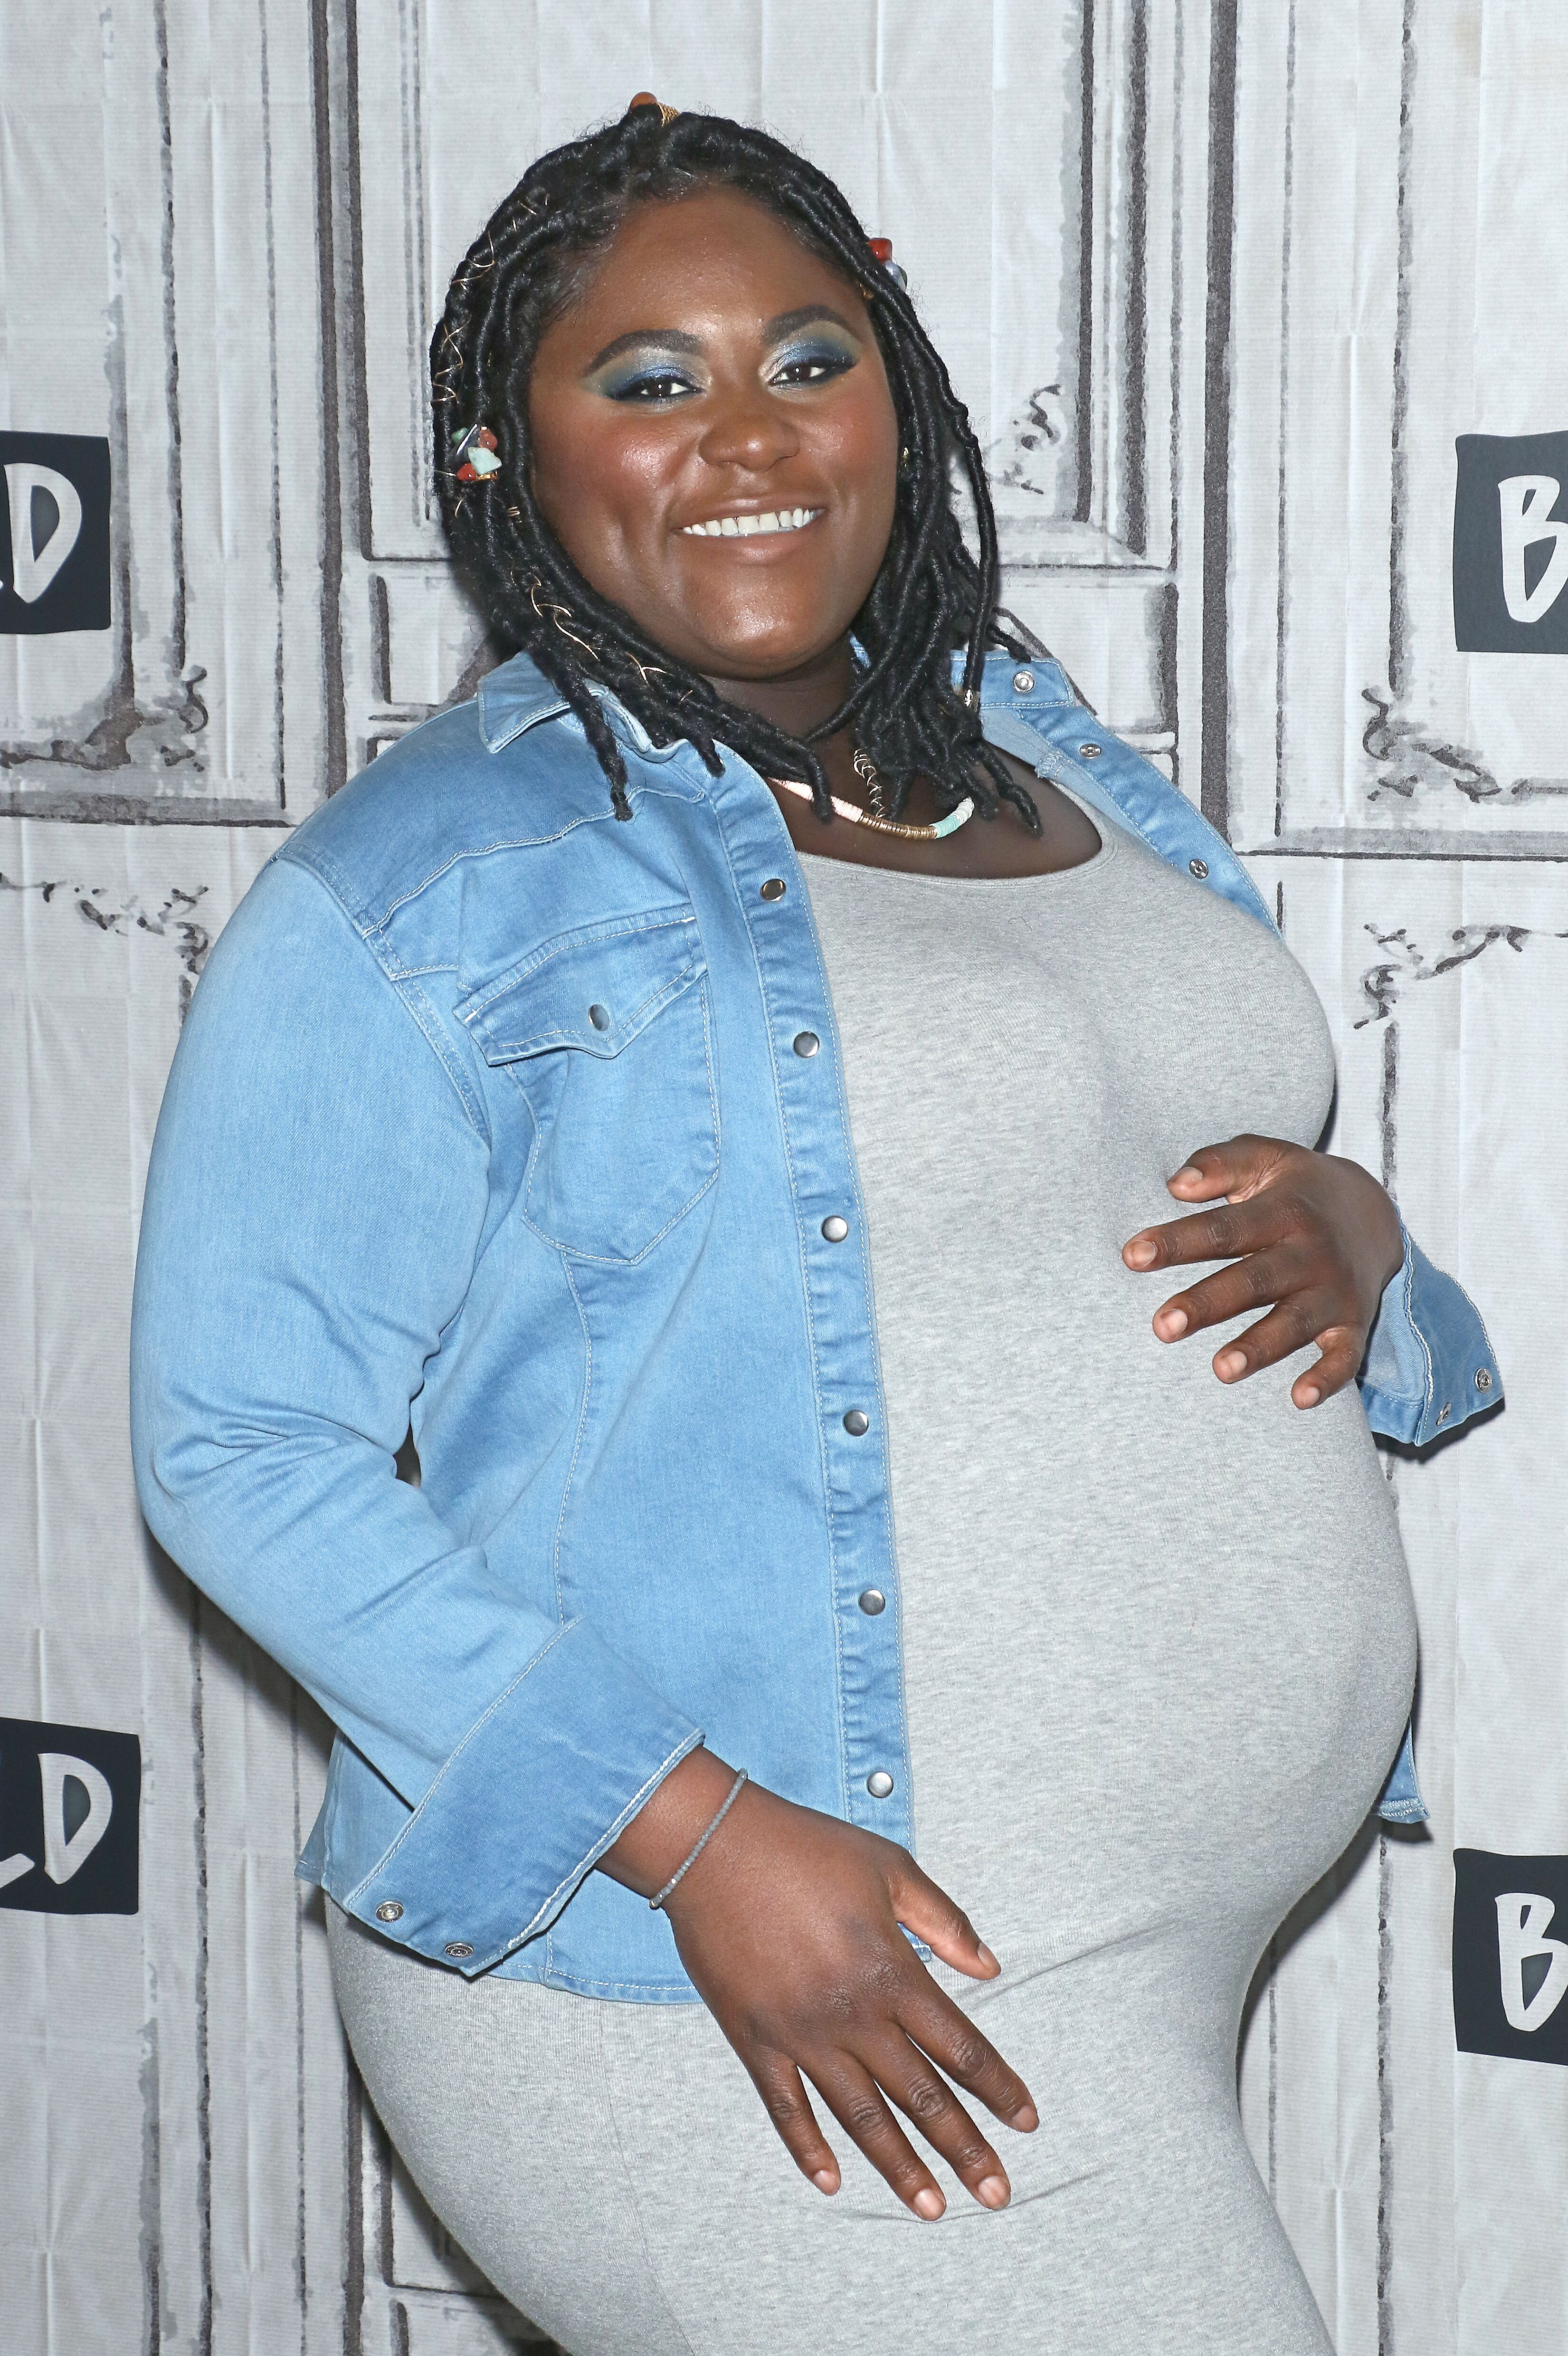 Danielle Brooks flaunting her baby bump at an event | Source: Getty Images/GlobalImagesUkraine